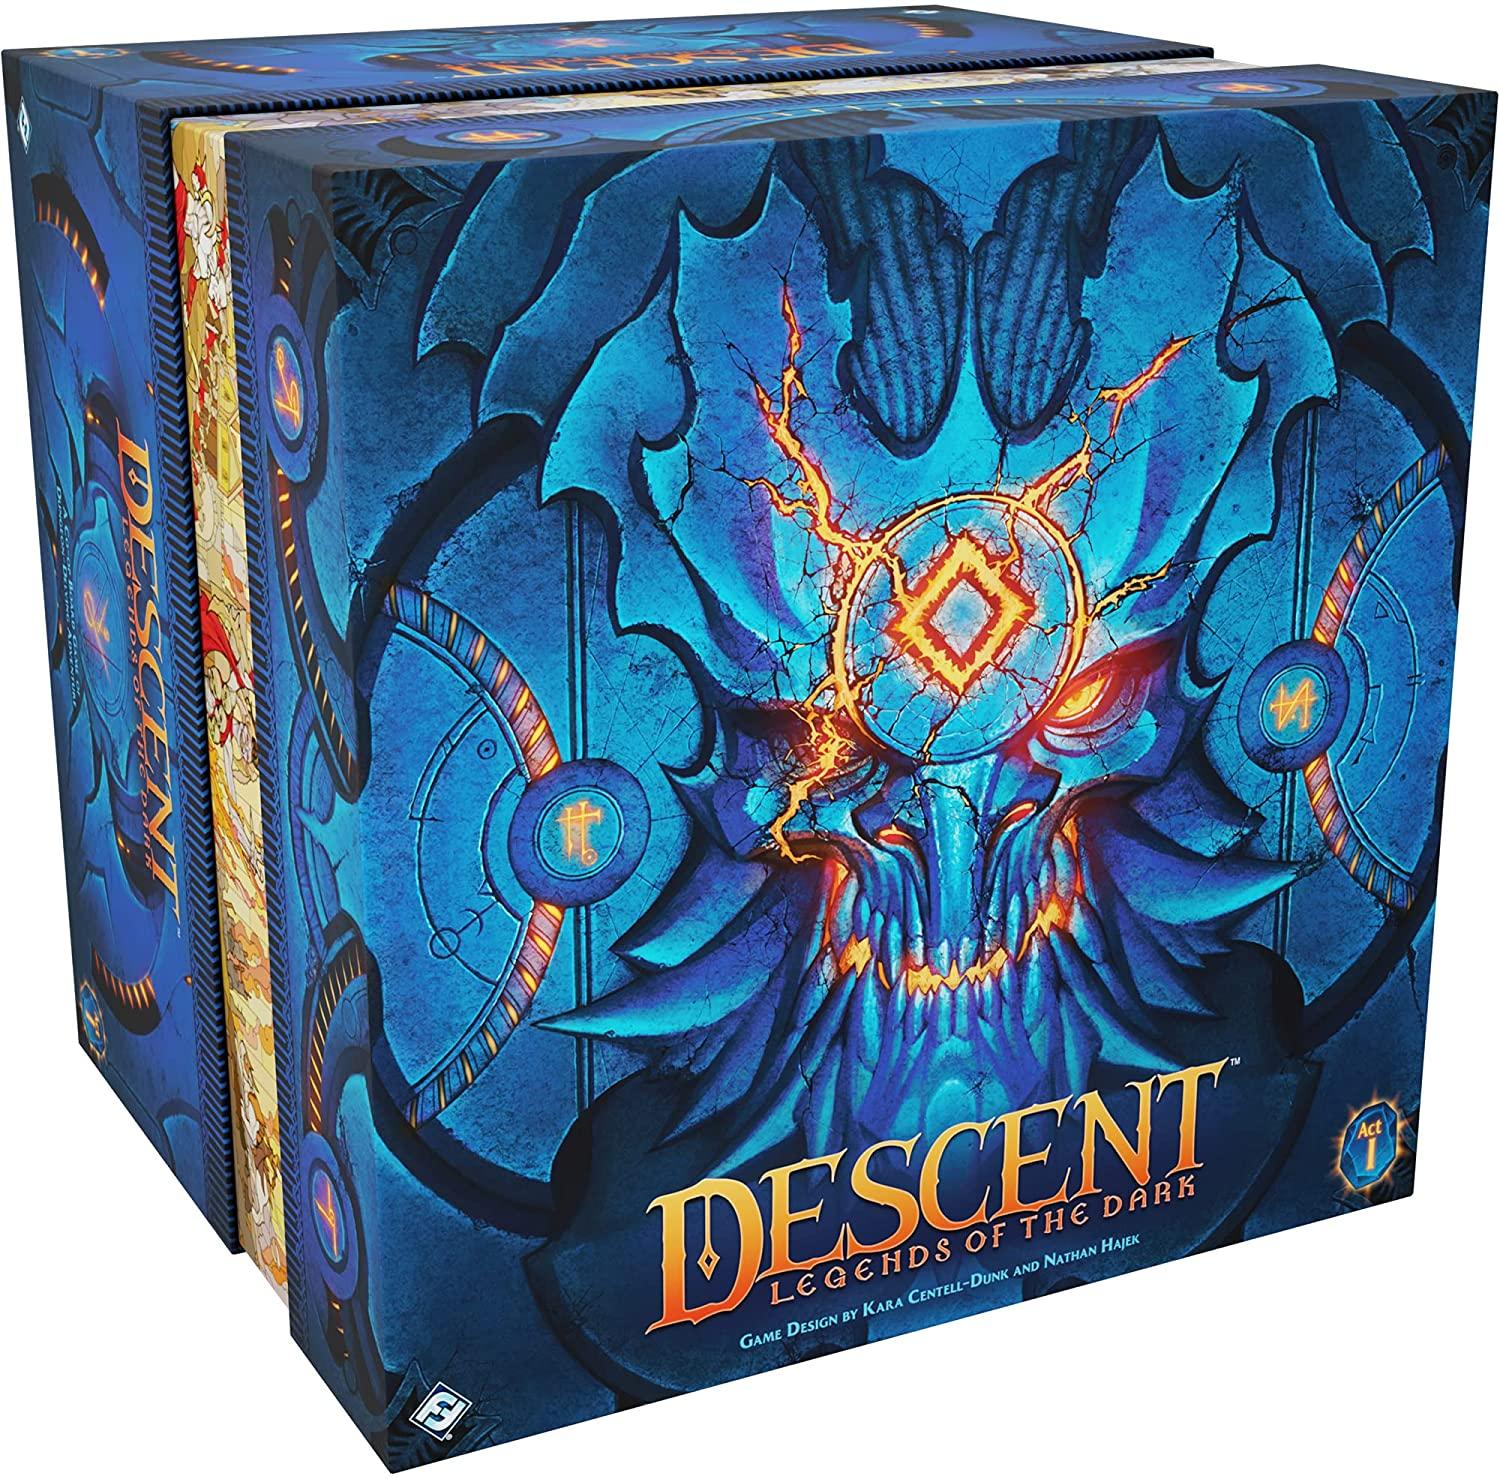 Descent Legends of The Dark Board Game for $139.96 Shipped